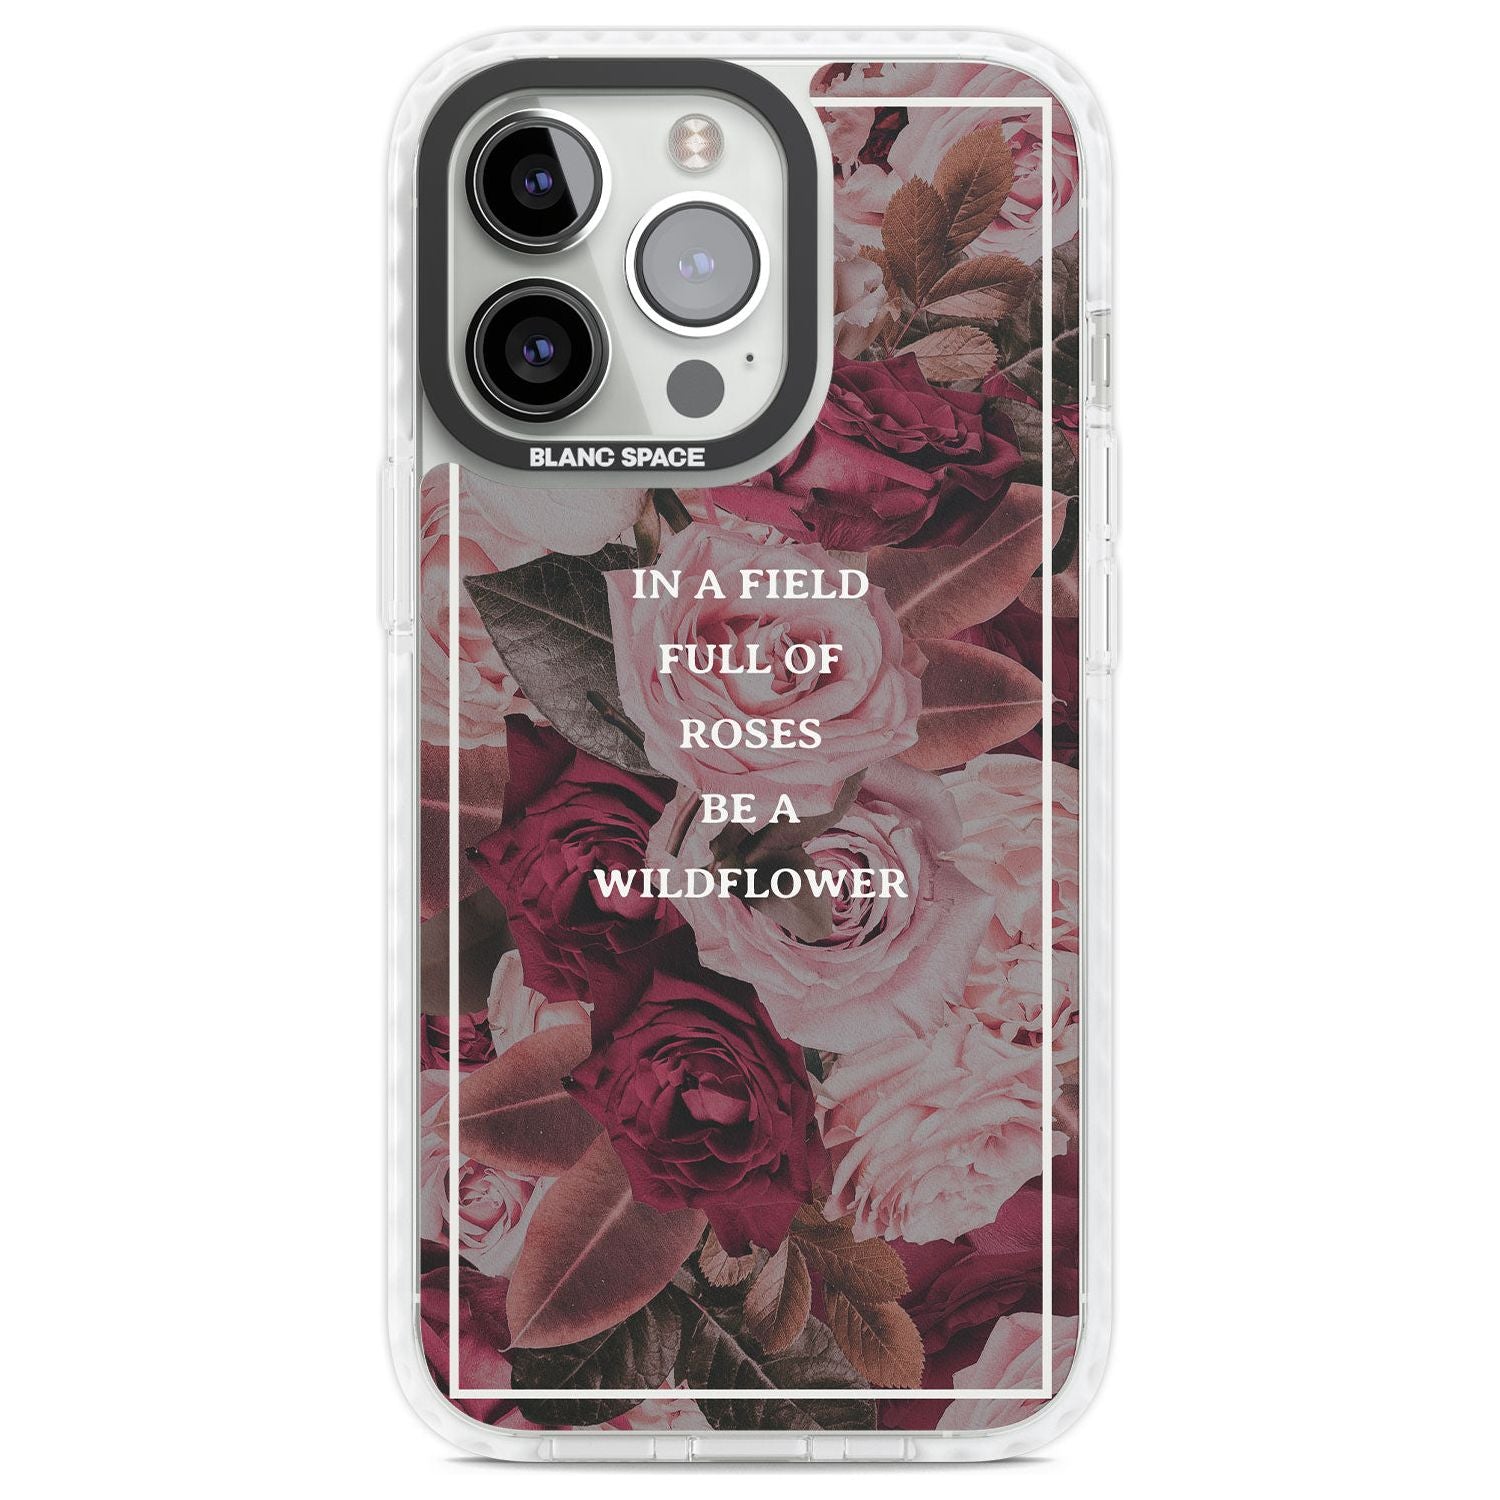 Be a Wildflower Floral Quote Phone Case iPhone 13 Pro / Impact Case,iPhone 14 Pro / Impact Case,iPhone 15 Pro Max / Impact Case,iPhone 15 Pro / Impact Case Blanc Space